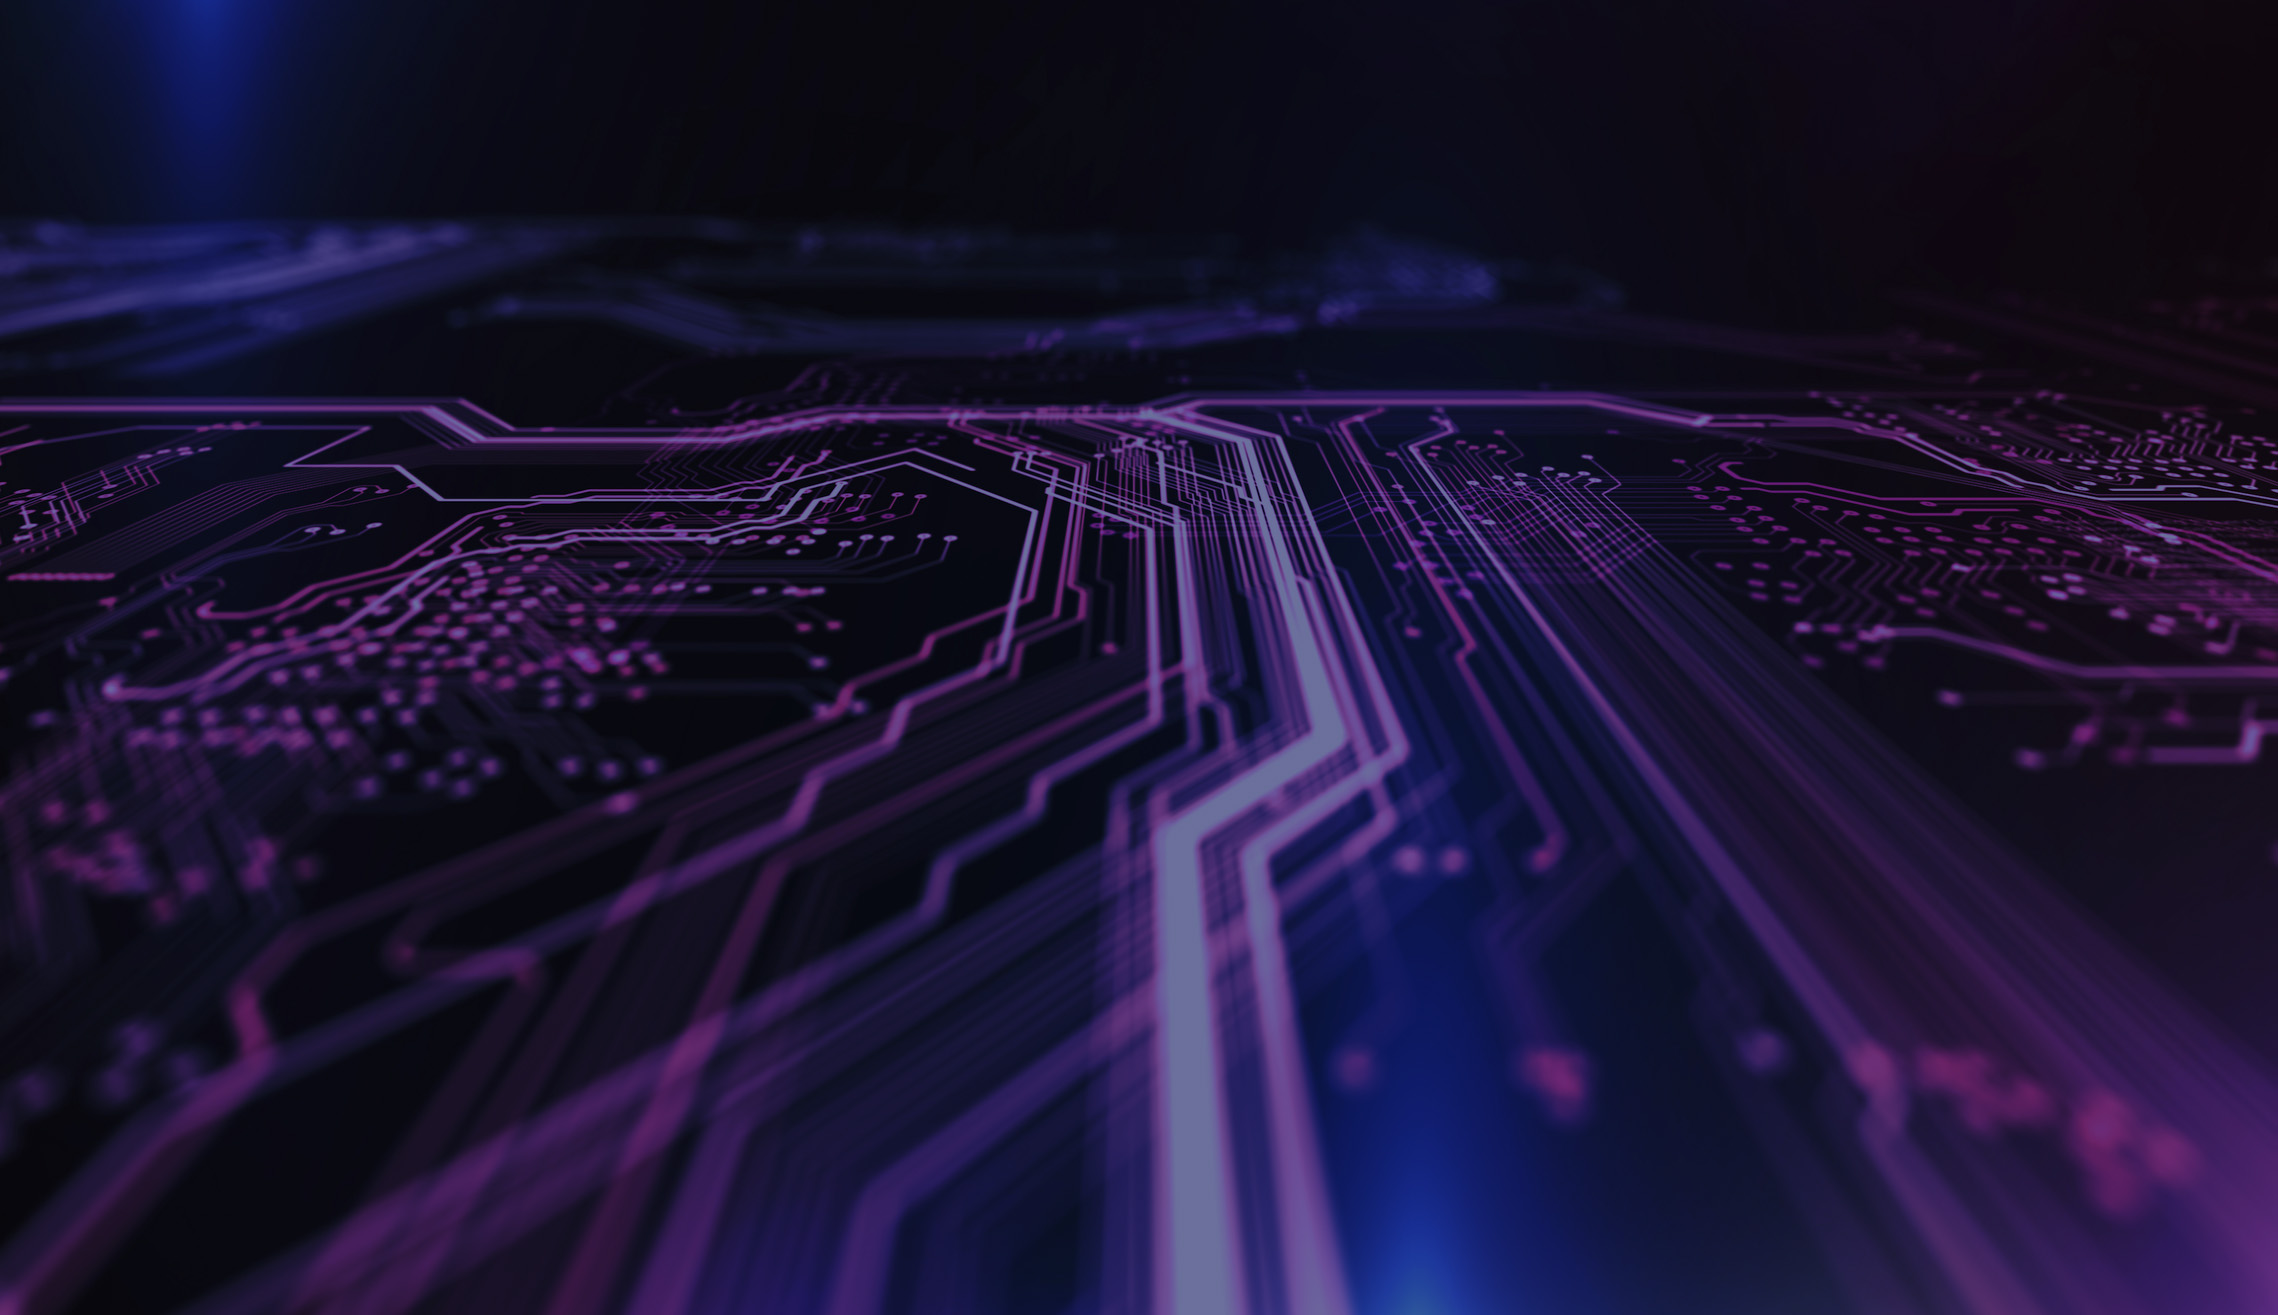 Artistic closeup of purple circuitry on a black background